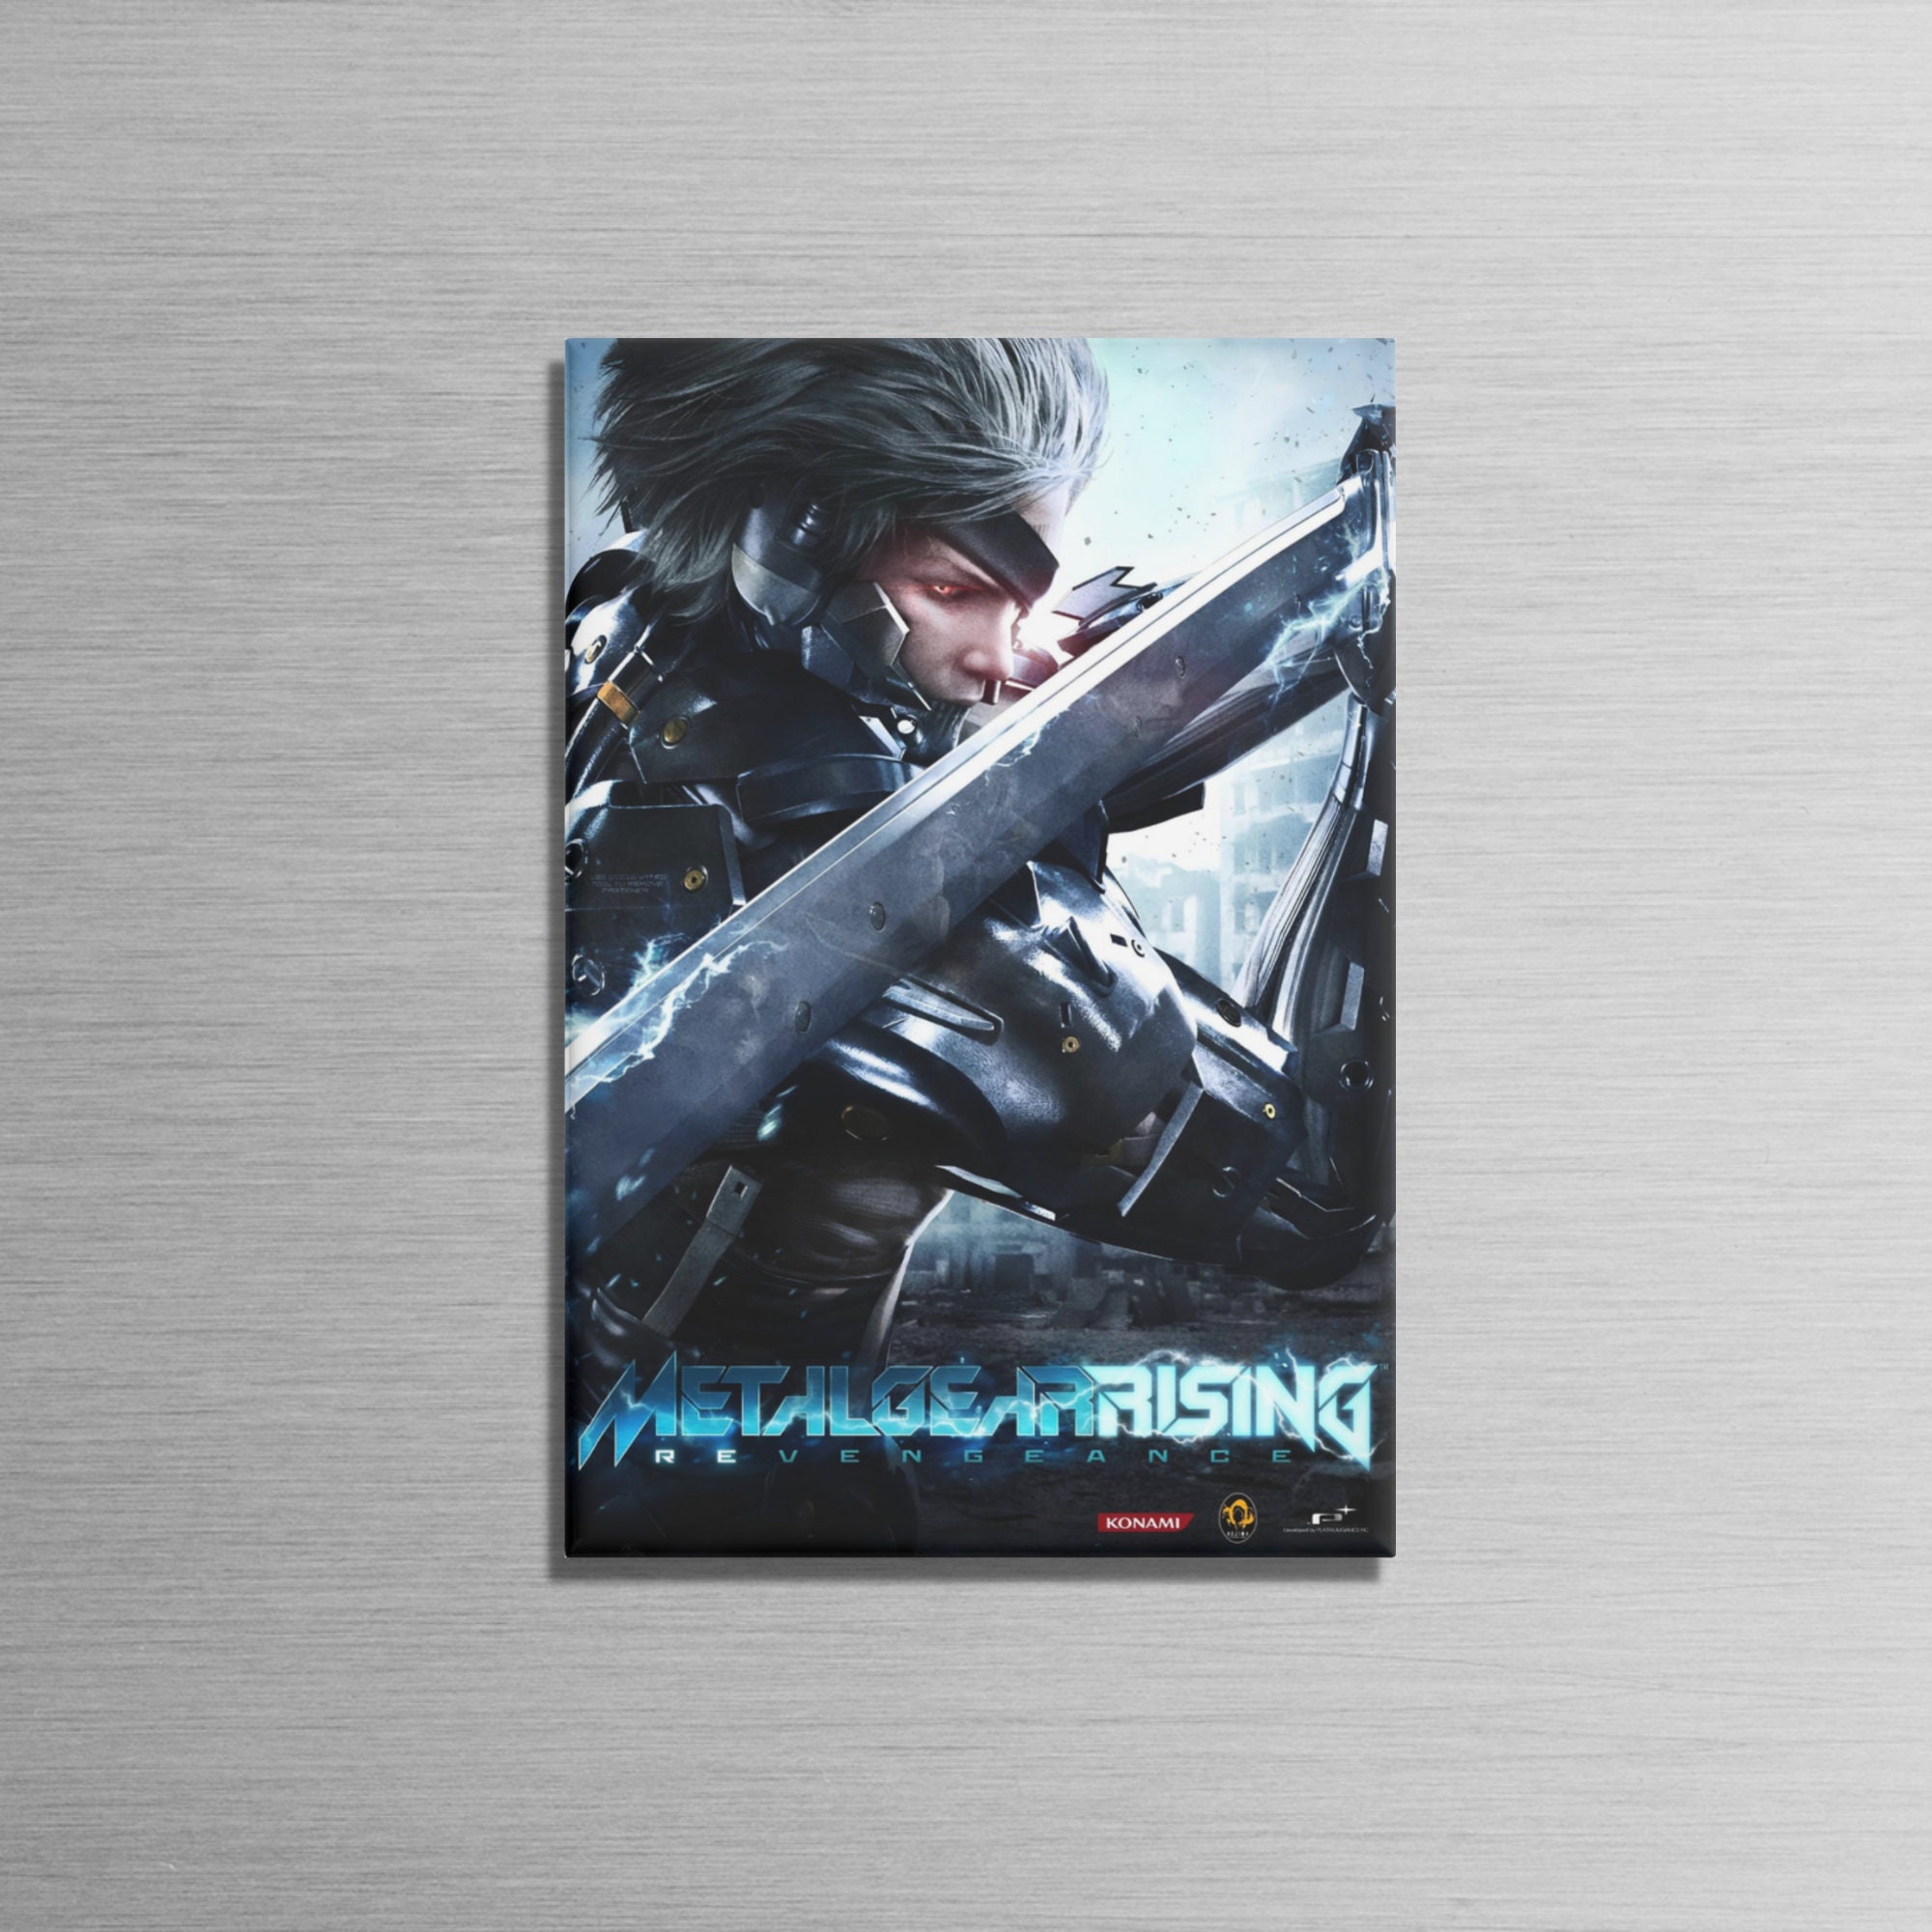 Lover Gifts Metal Gear Rising Gift For Fan Photographic Print for Sale by  Drnovakutch